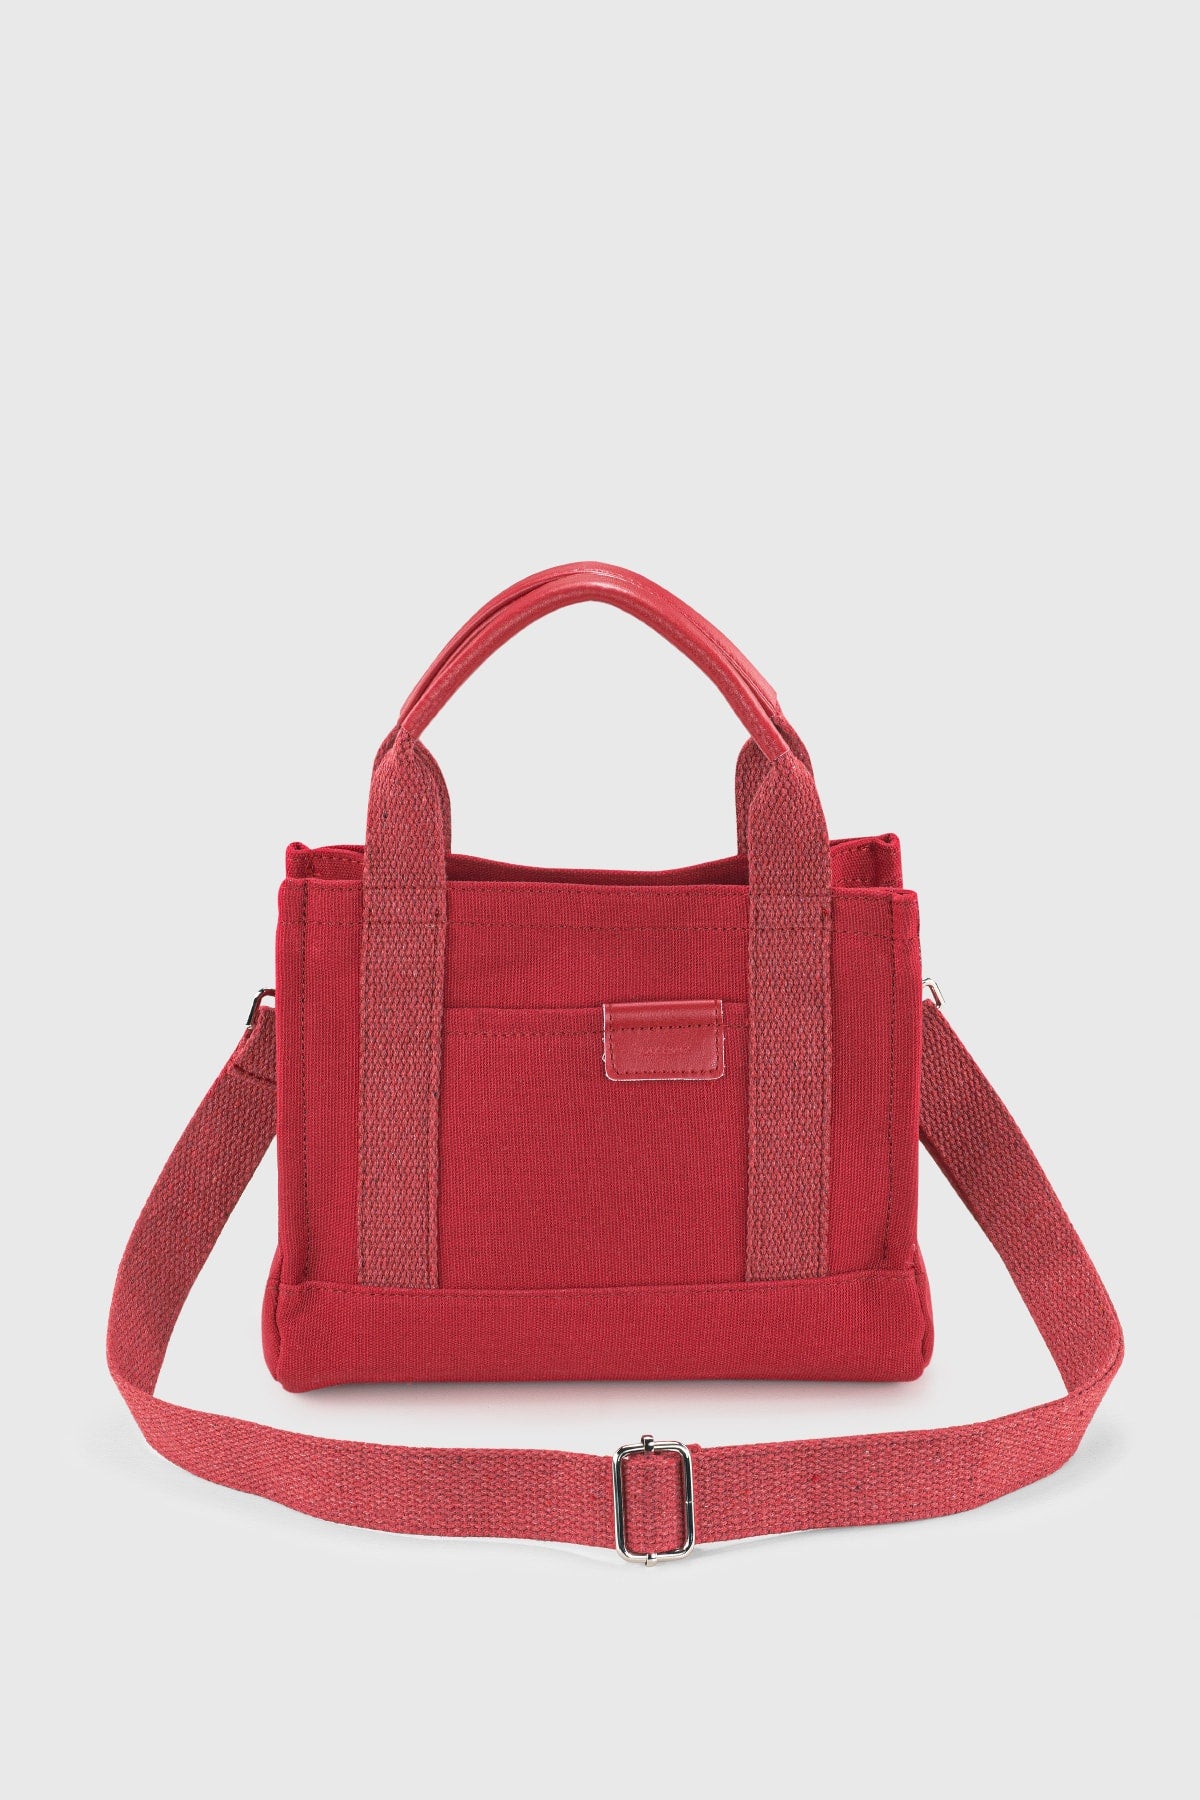 Women's Red Canvas Tote Bag 232